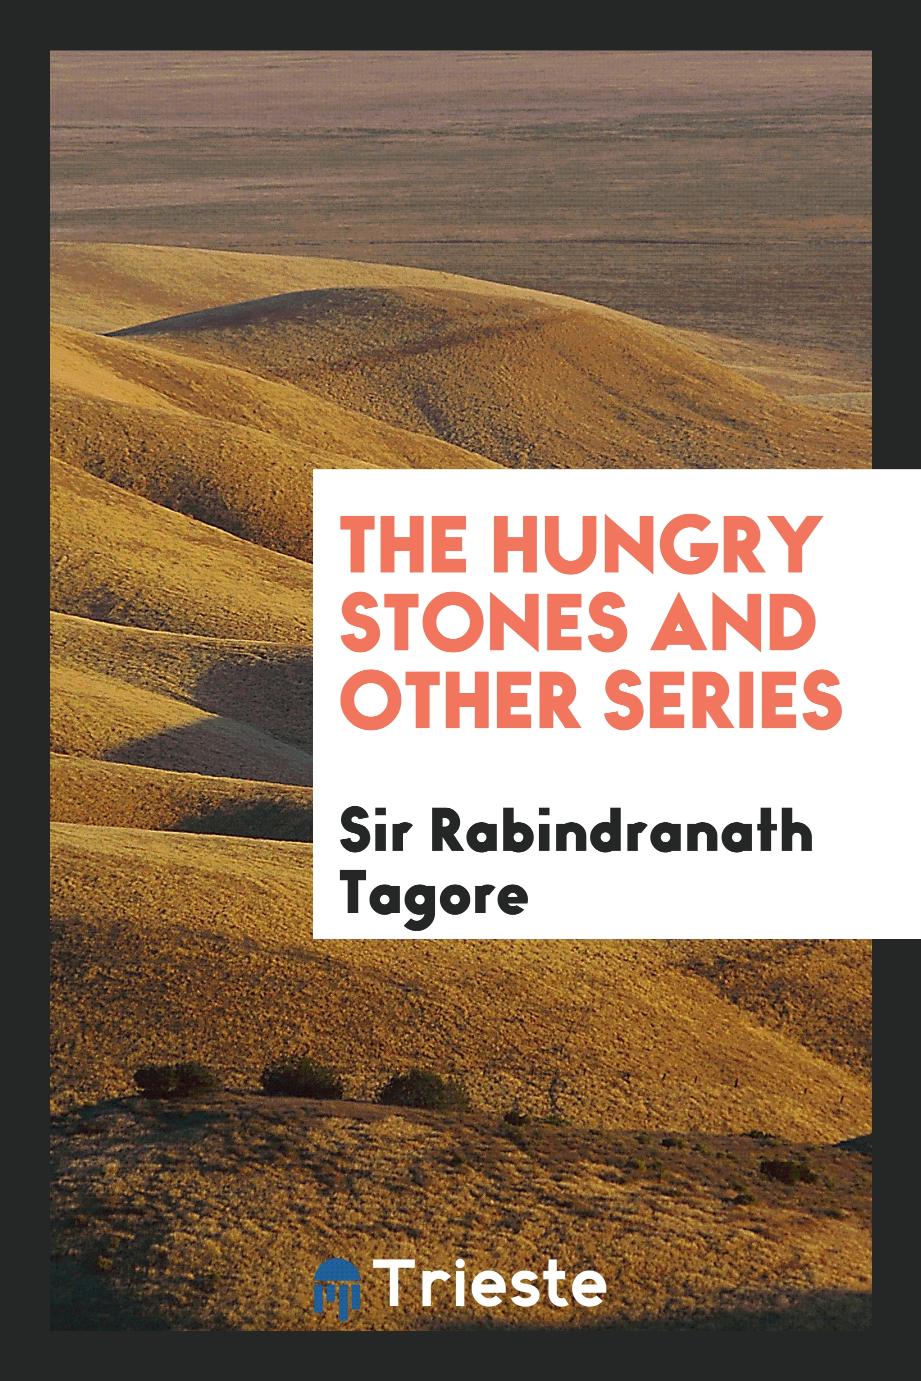 The Hungry Stones and Other Series